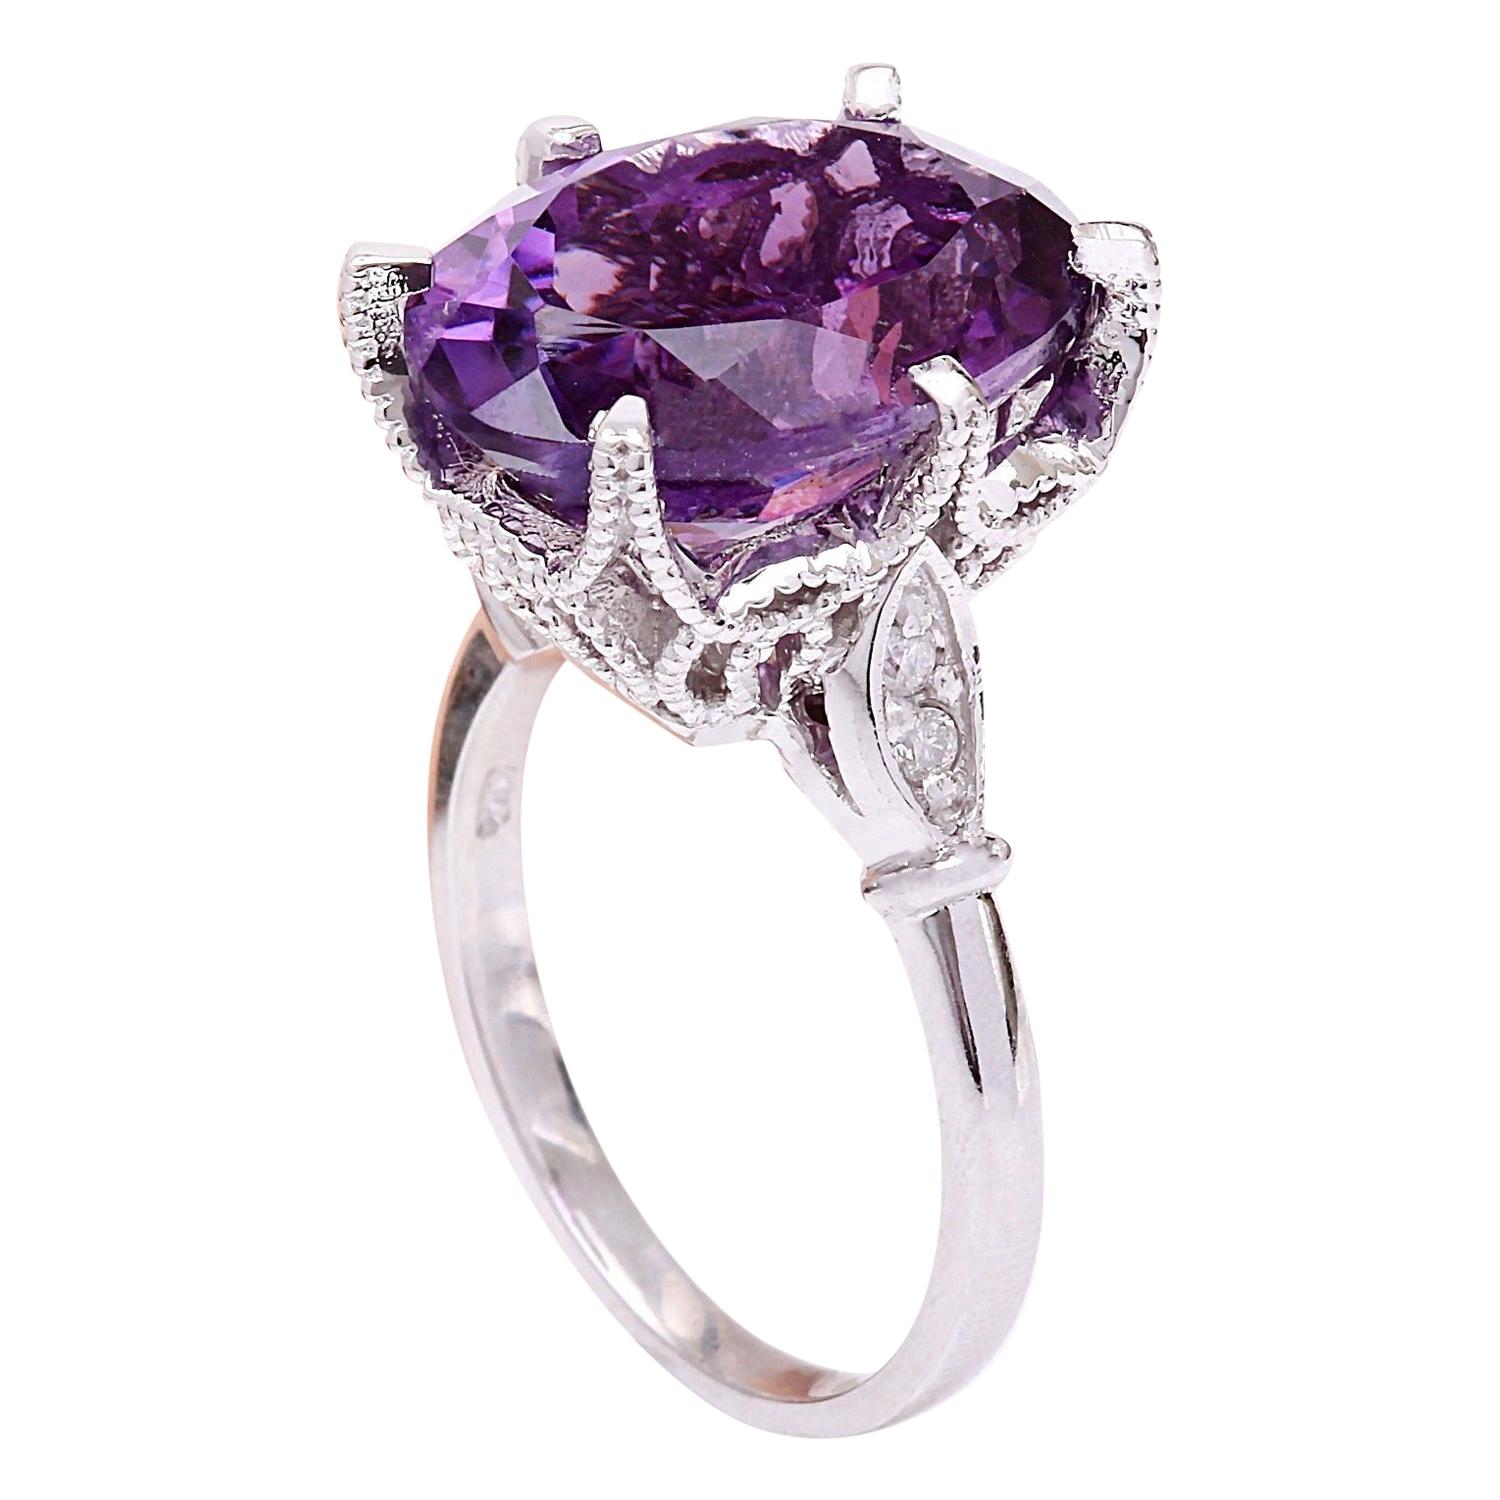 8.64 Carat Natural Amethyst 14 Karat Solid White Gold Diamond Ring In New Condition For Sale In Los Angeles, CA